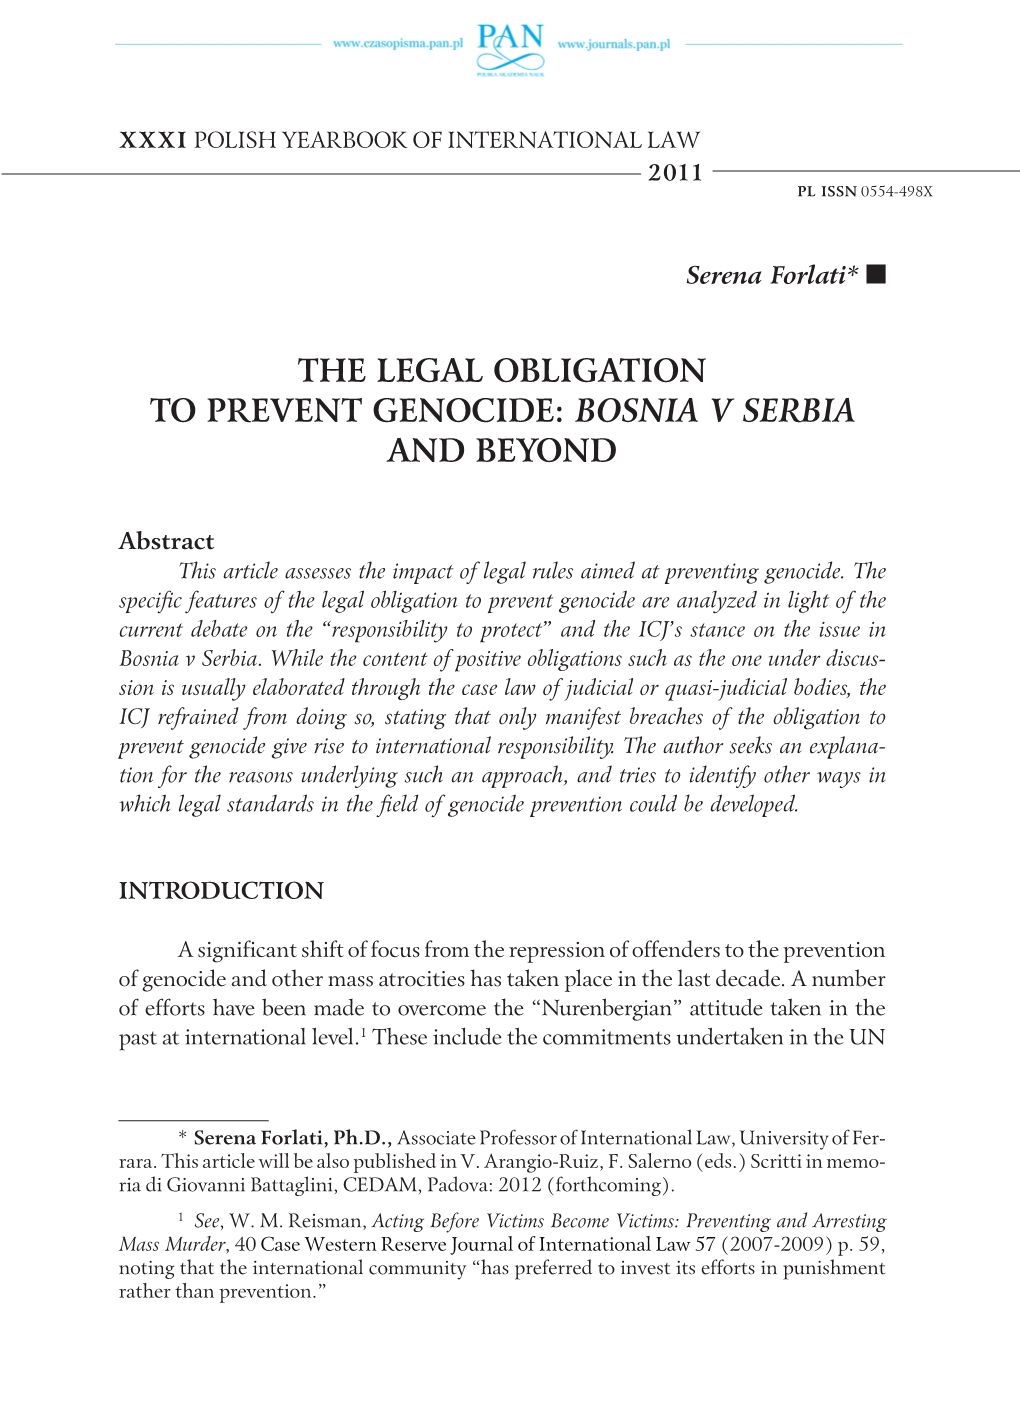 The Legal Obligation to Prevent Genocide: Bosnia V Serbia and Beyond